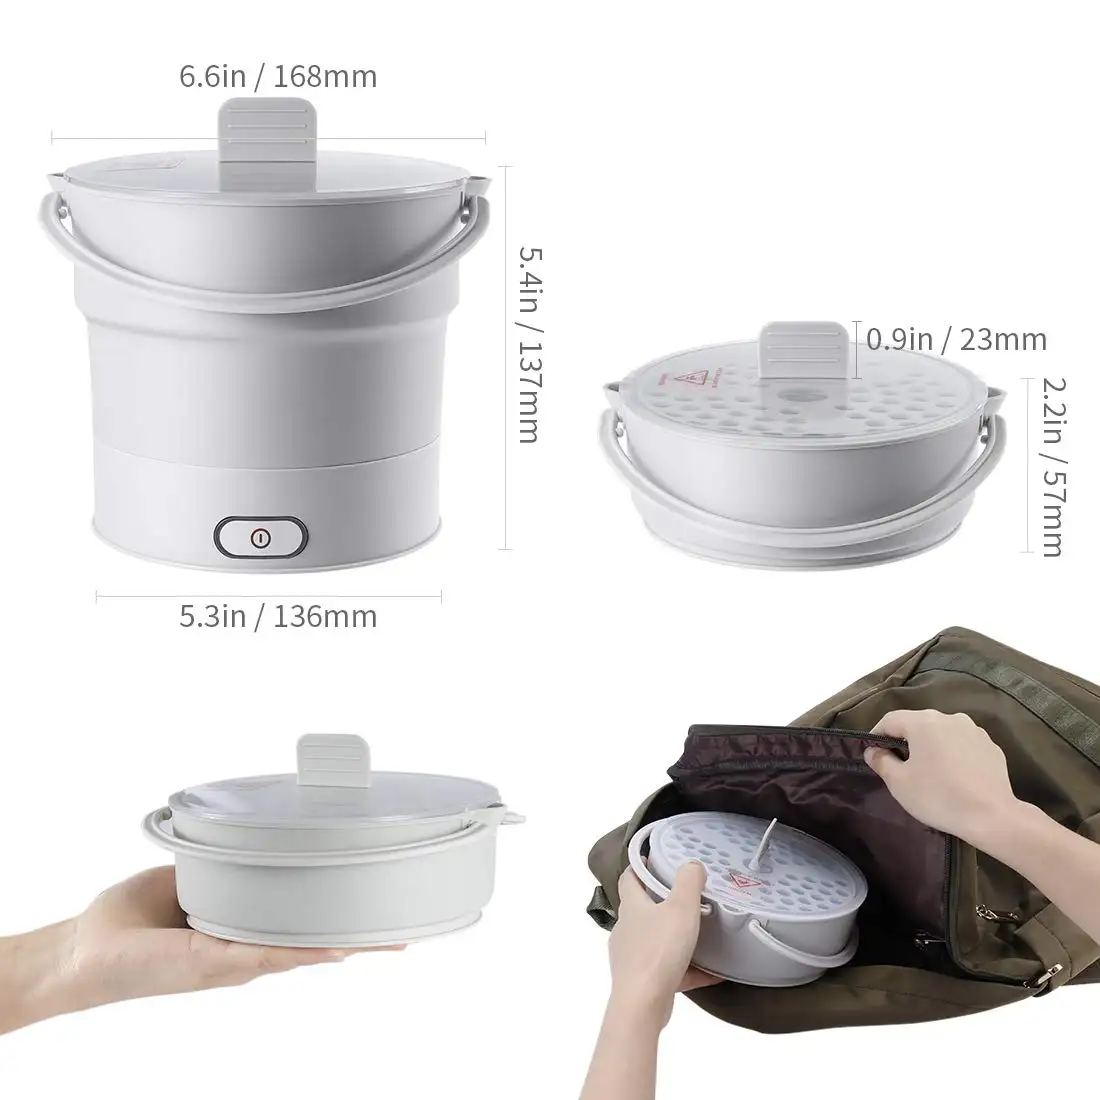 2019 New arrival electric cooker pot portable folding hot pot luxury electric instant steam cooking pot